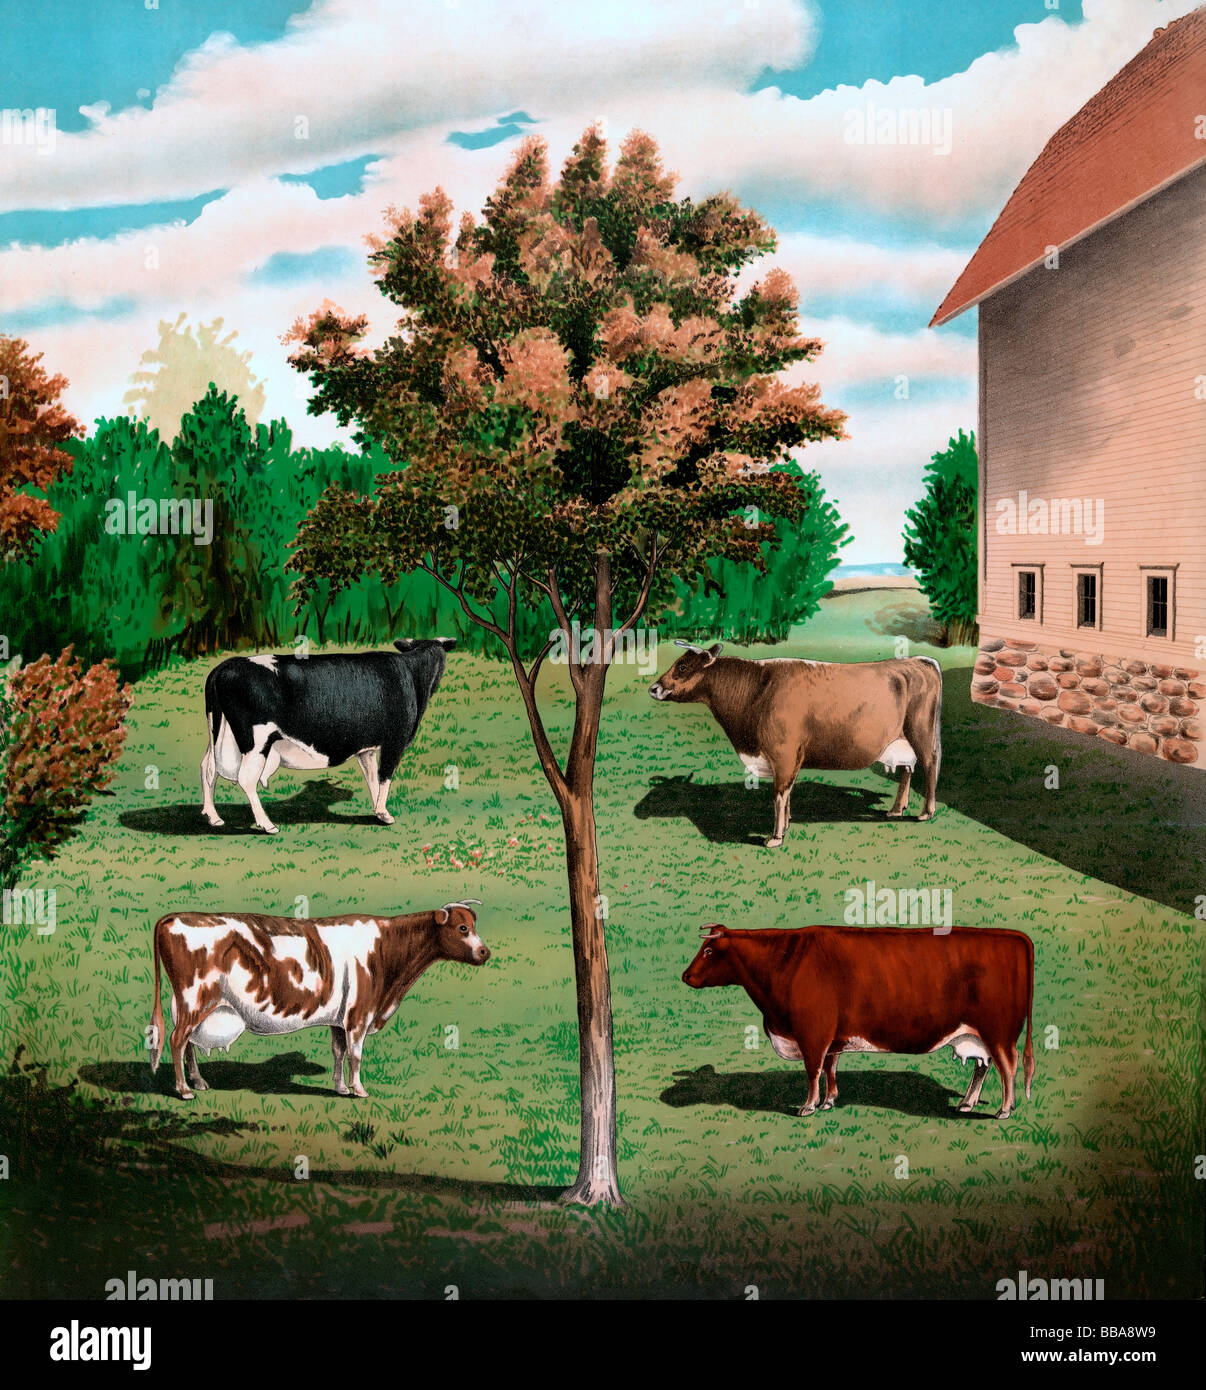 Typical cows - Illustration of four cows - Jersey, Holstein, Ayrshire, Short-horn Stock Photo